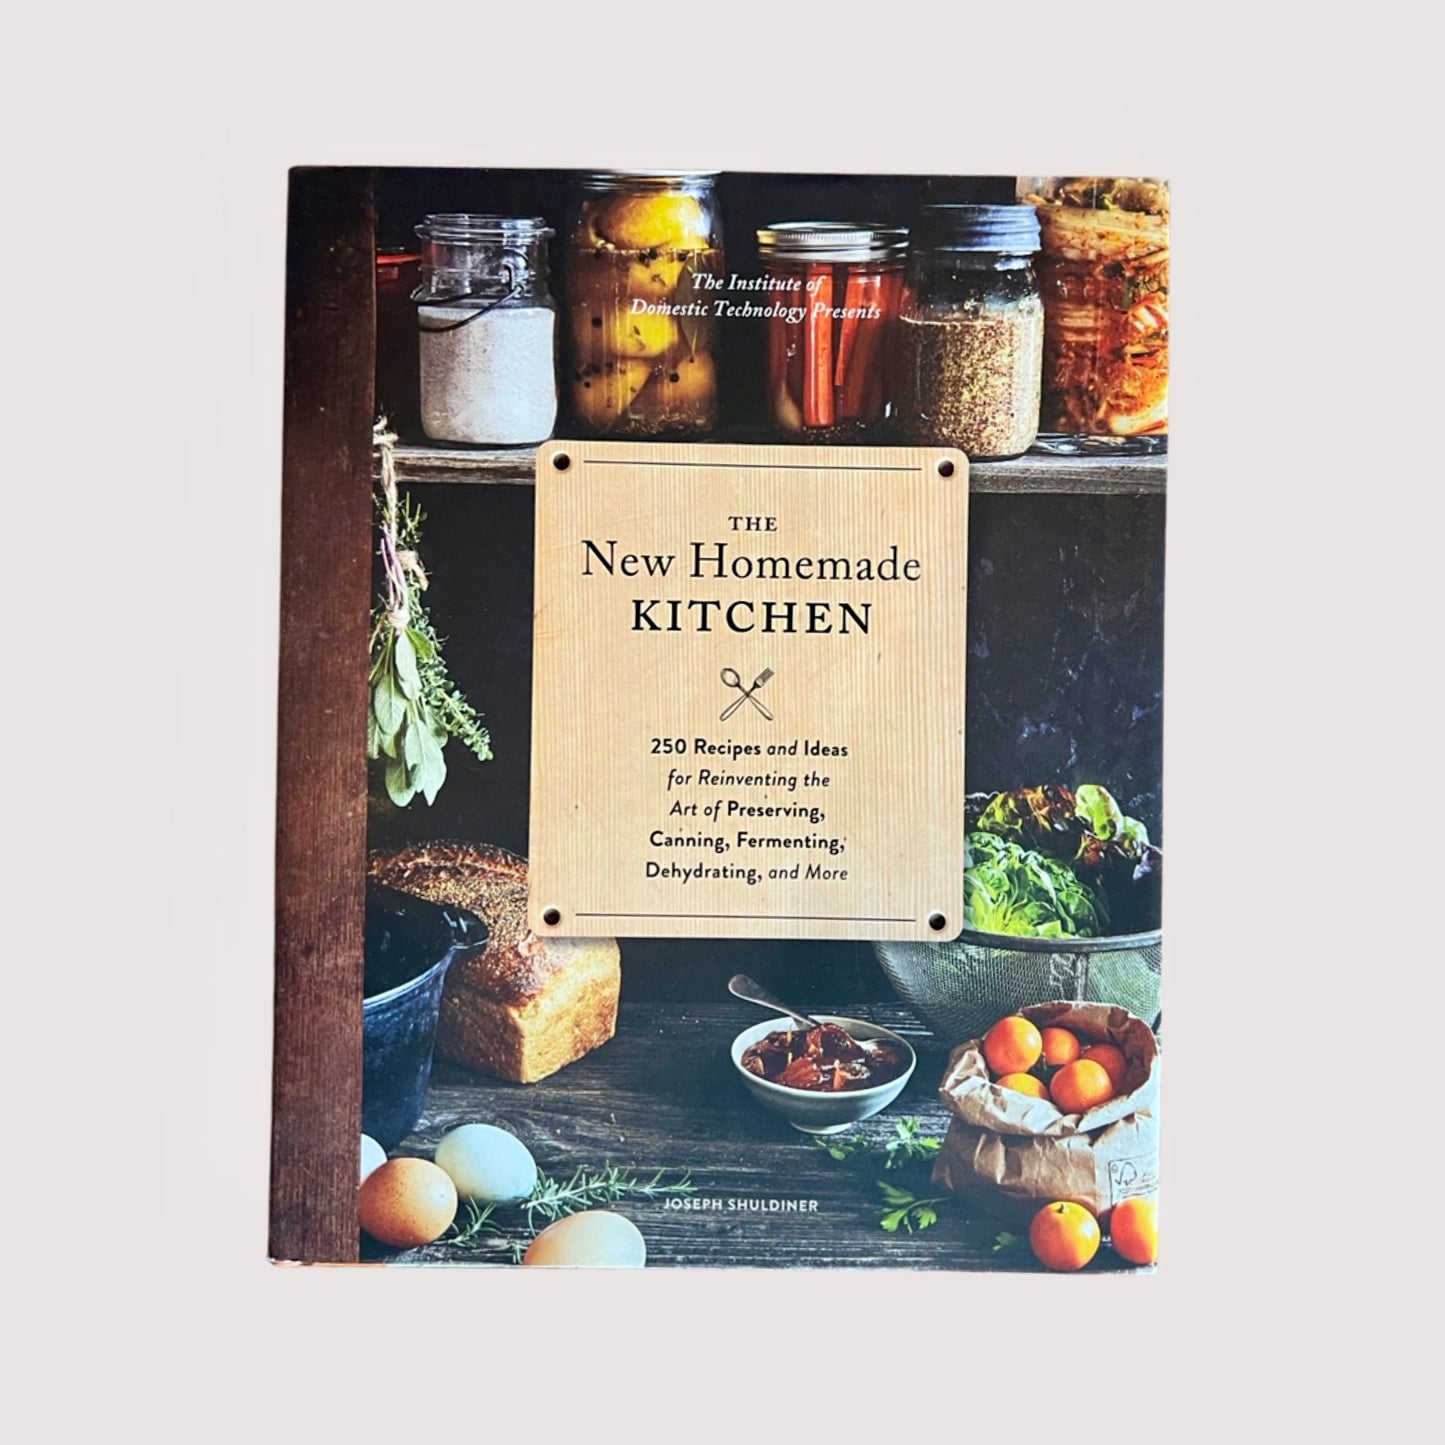 The New Homemade Kitchen Book